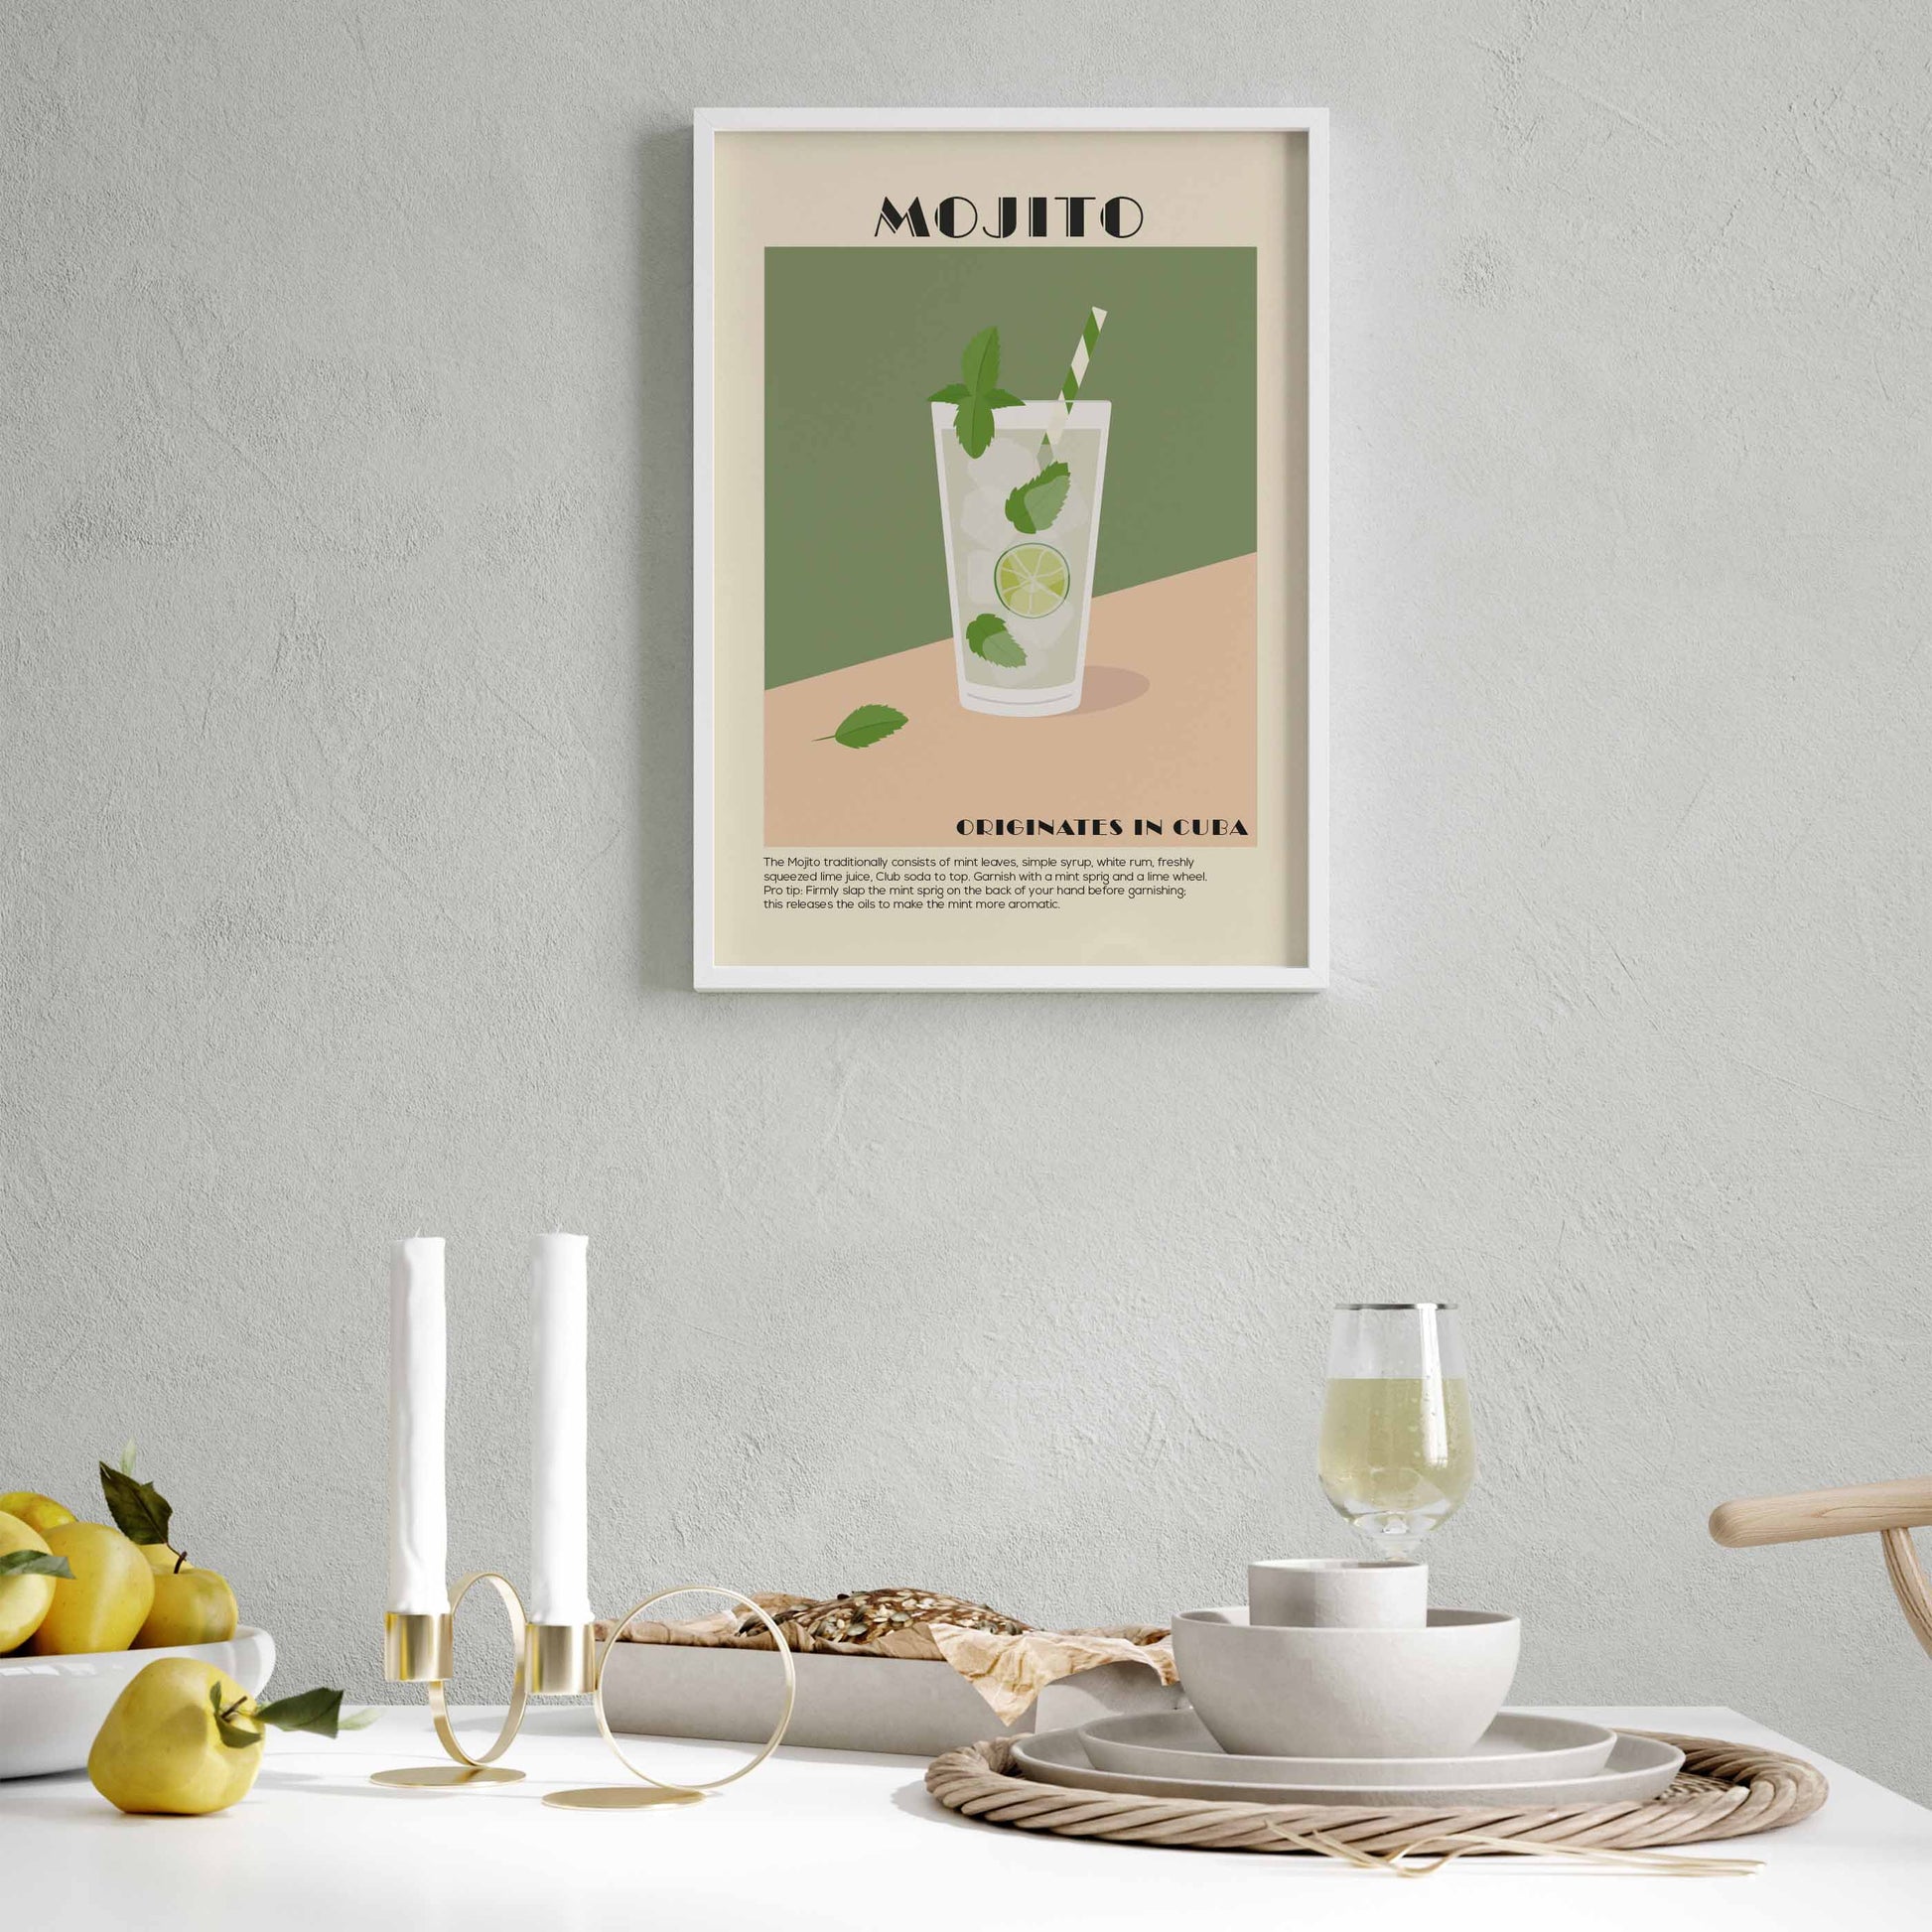 Mojito Cocktail Wall Art Print in an Art Deco Style